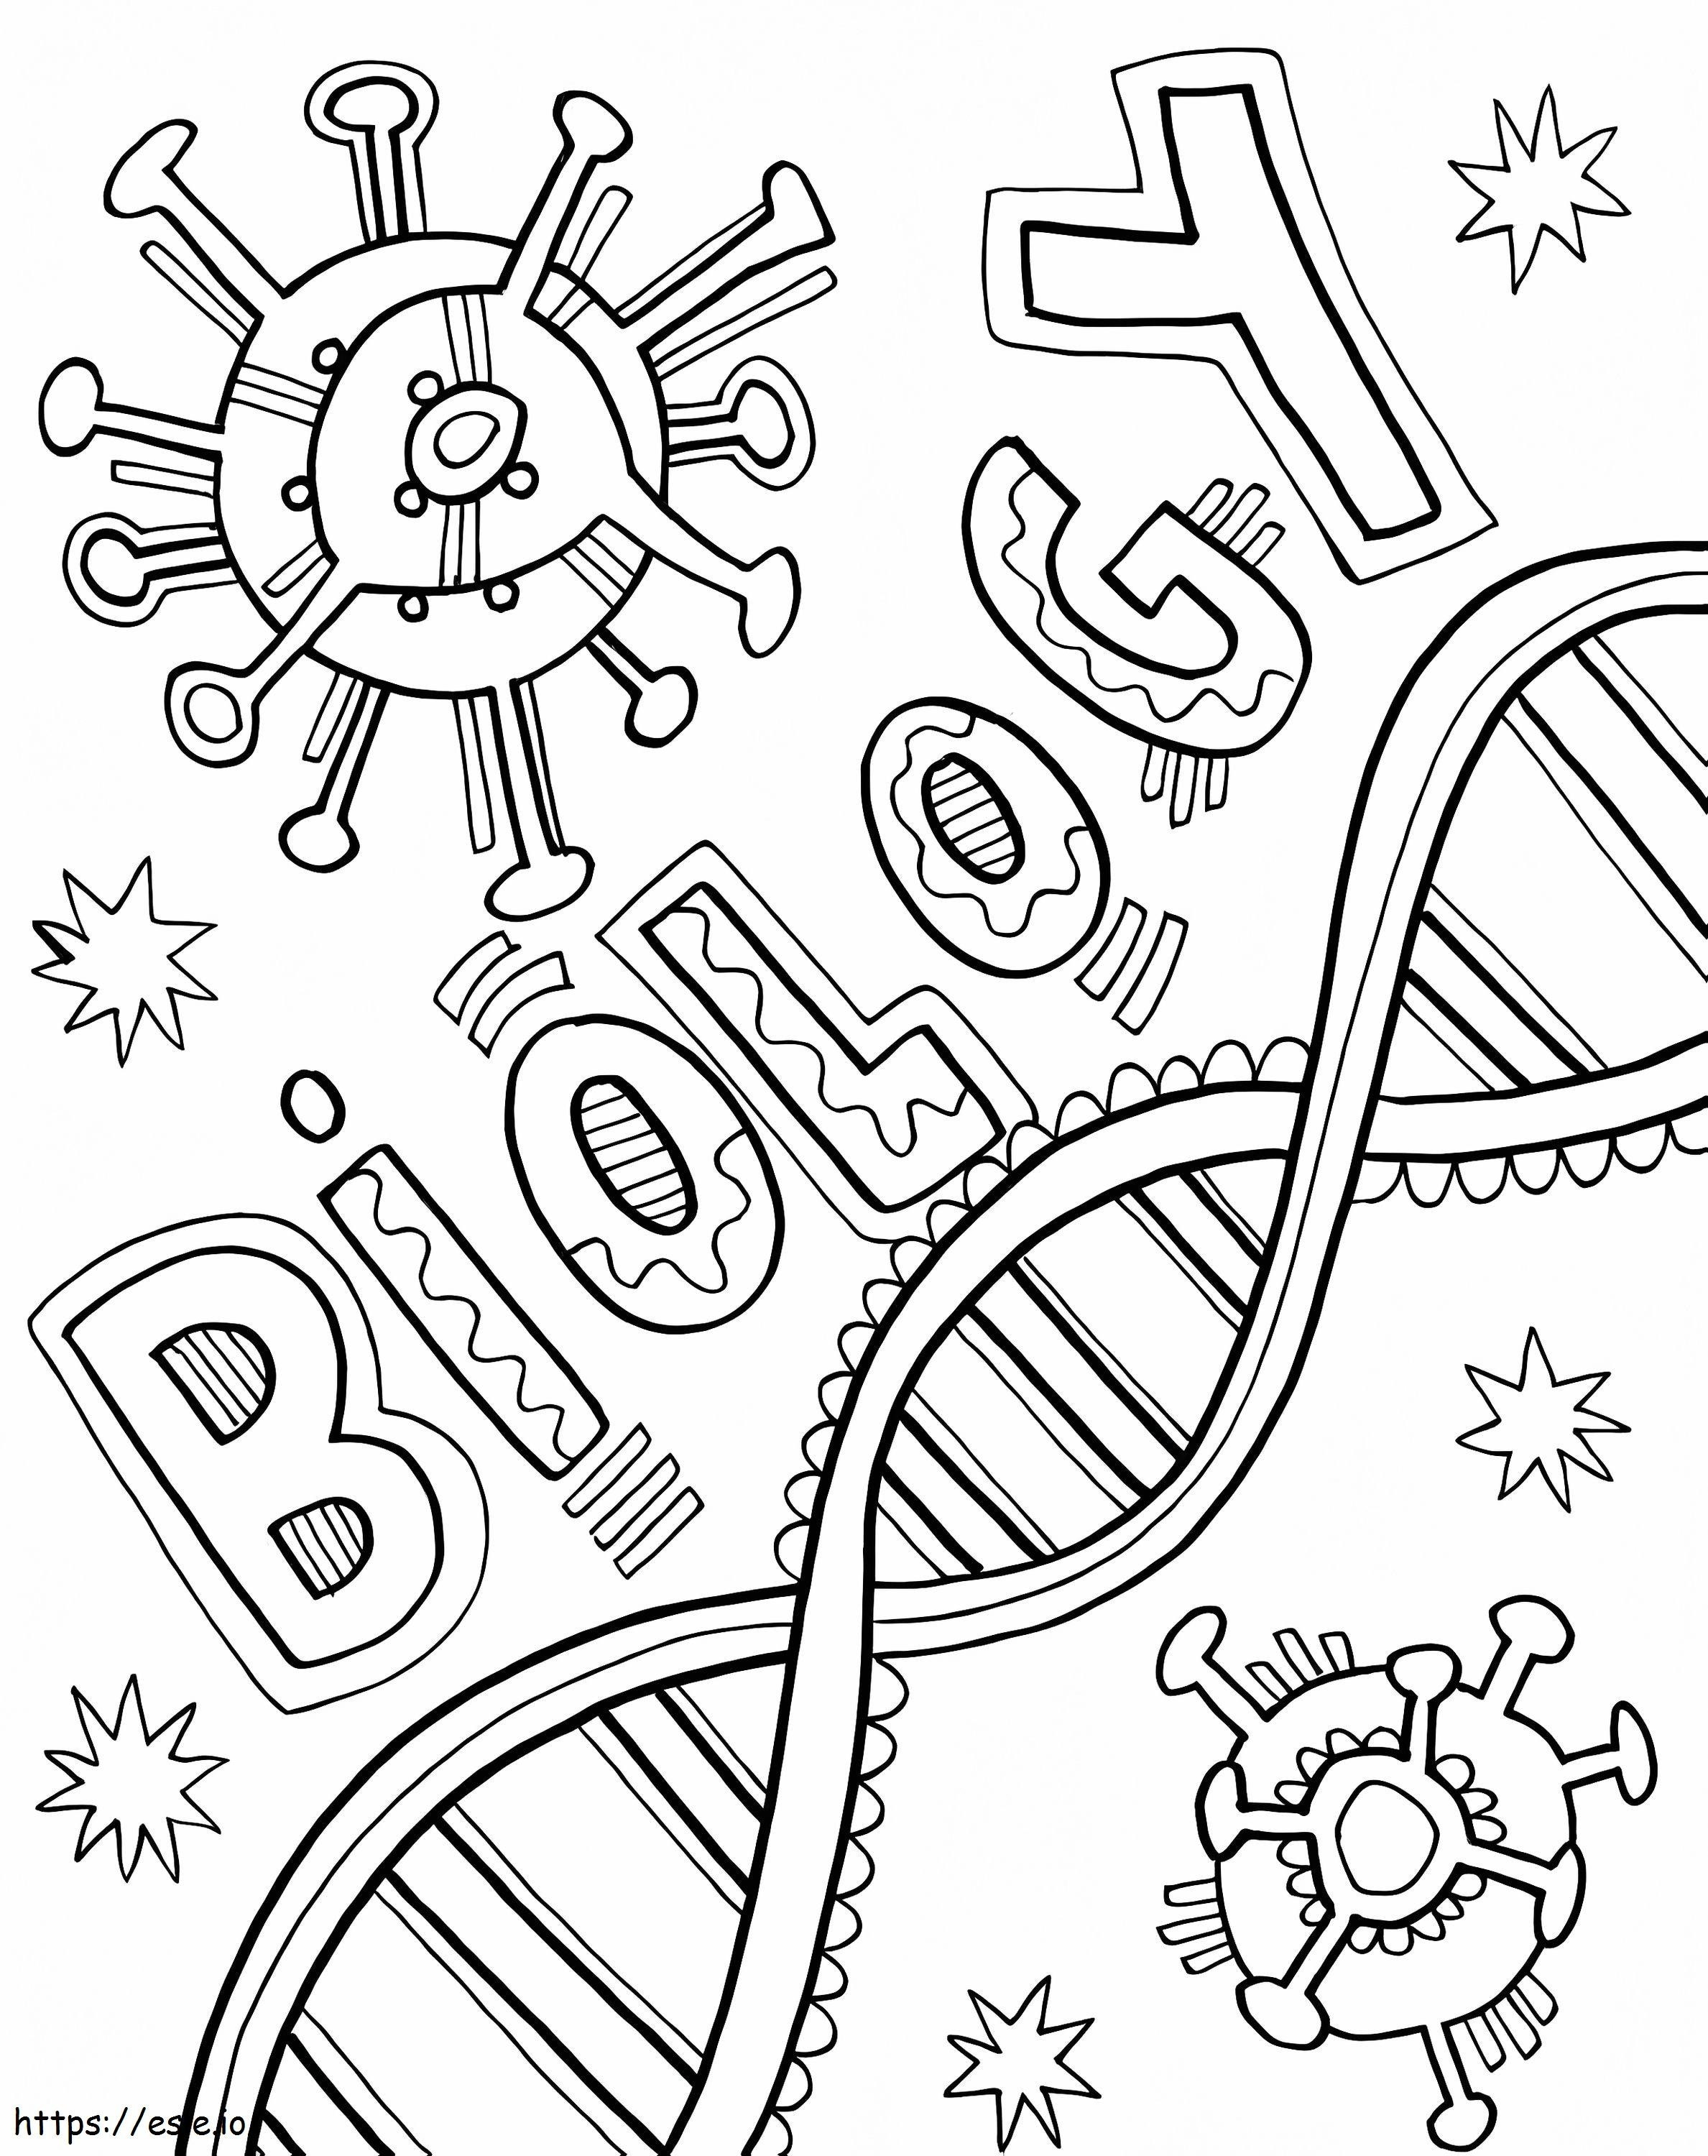 Biology Science coloring page